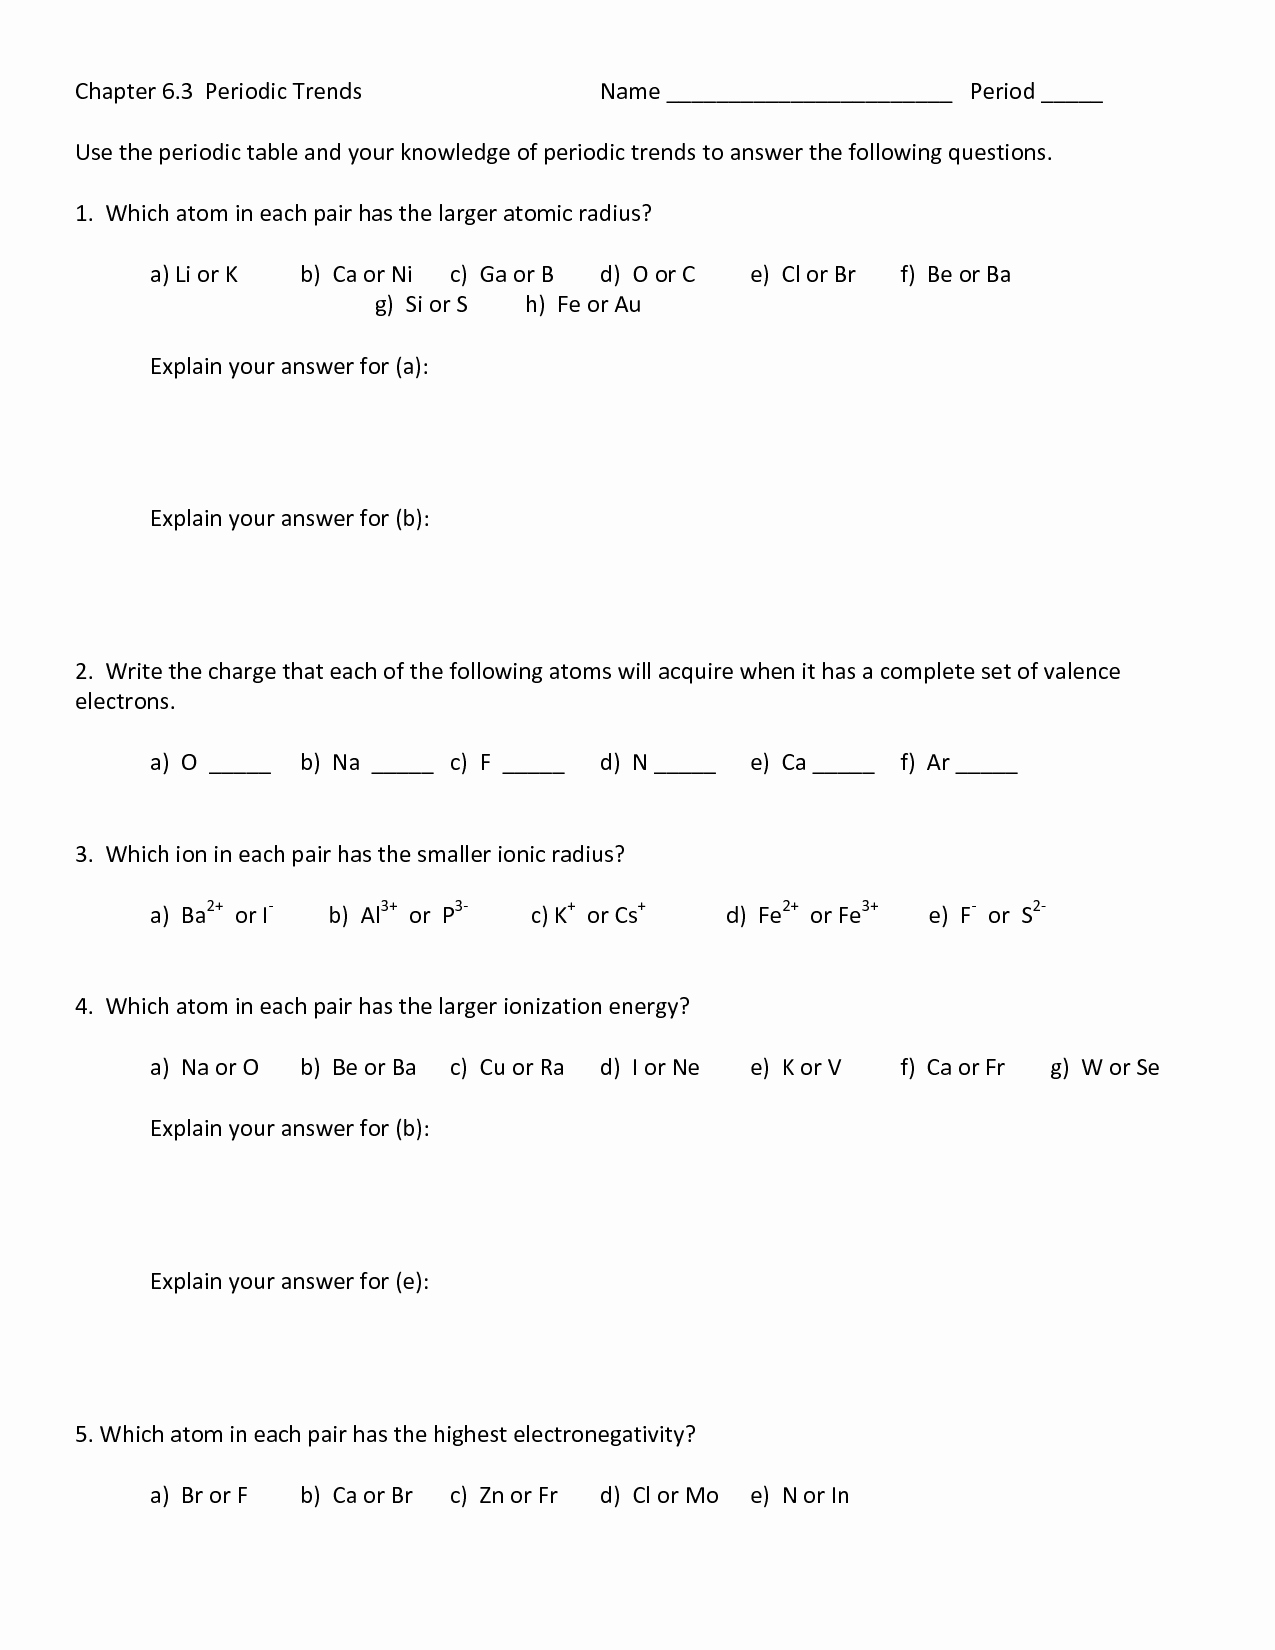 Periodic Trends Practice Worksheet Answers Luxury 20 Best Of Periodic Trends Worksheet Answers Key